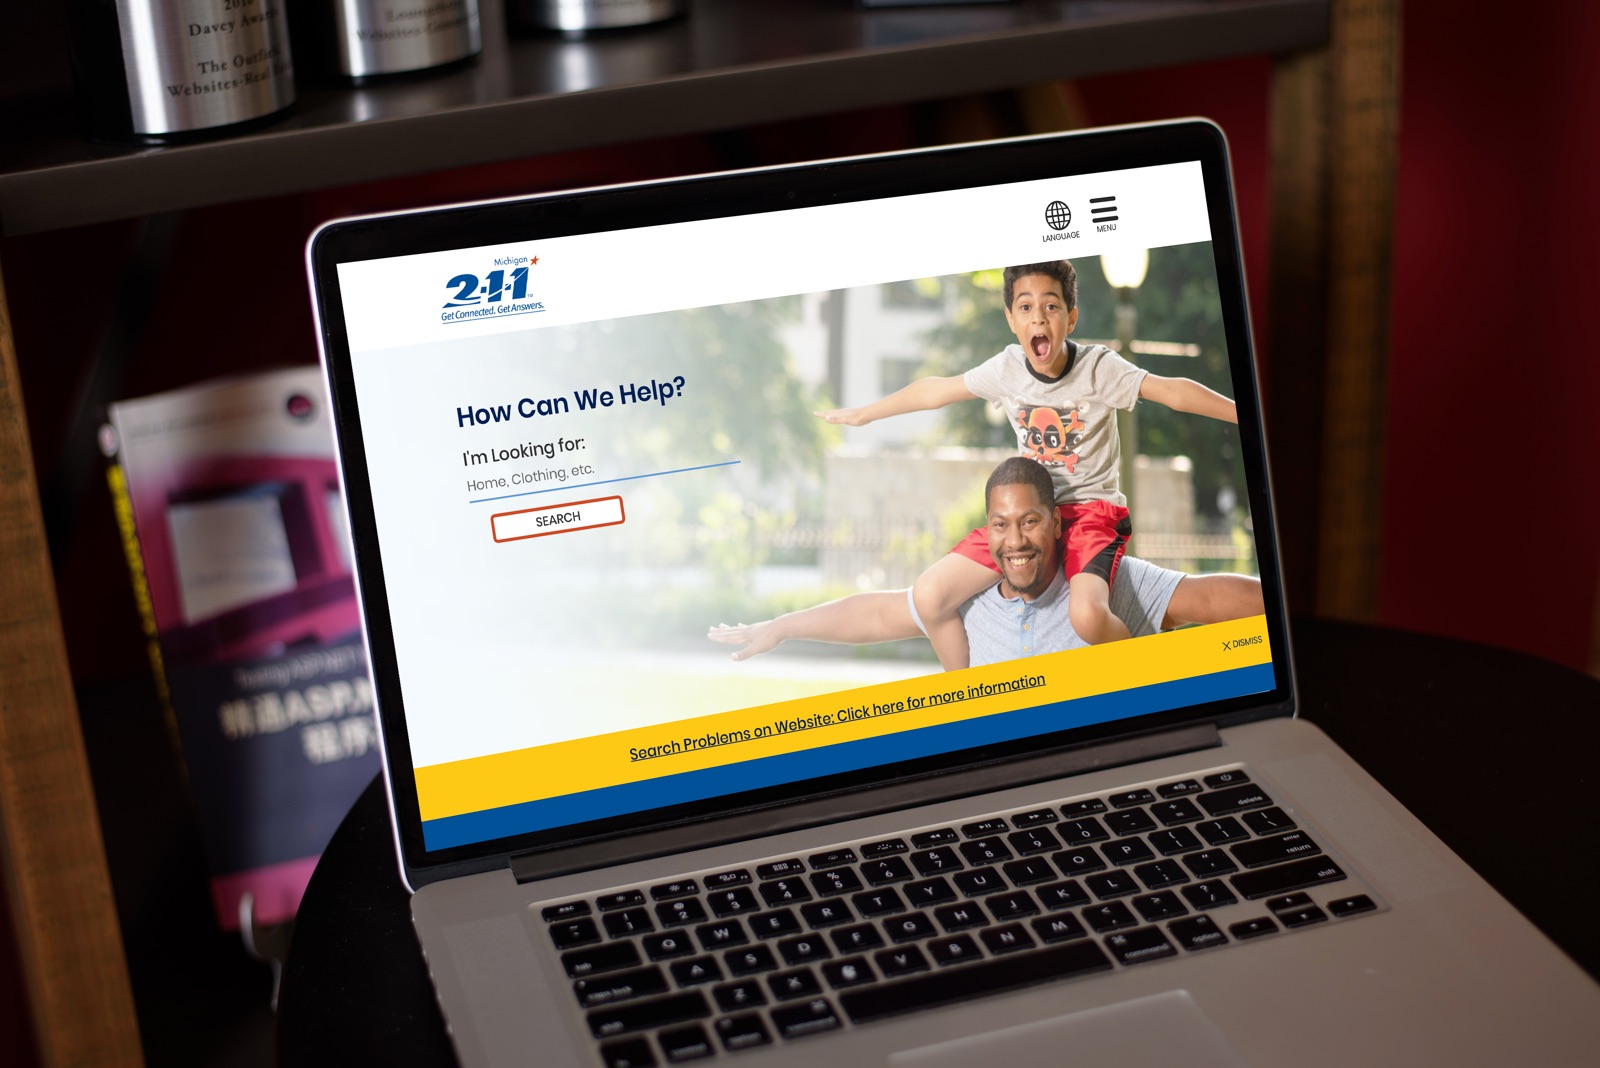 The Michigan 2-1-1 website homepage on a laptop